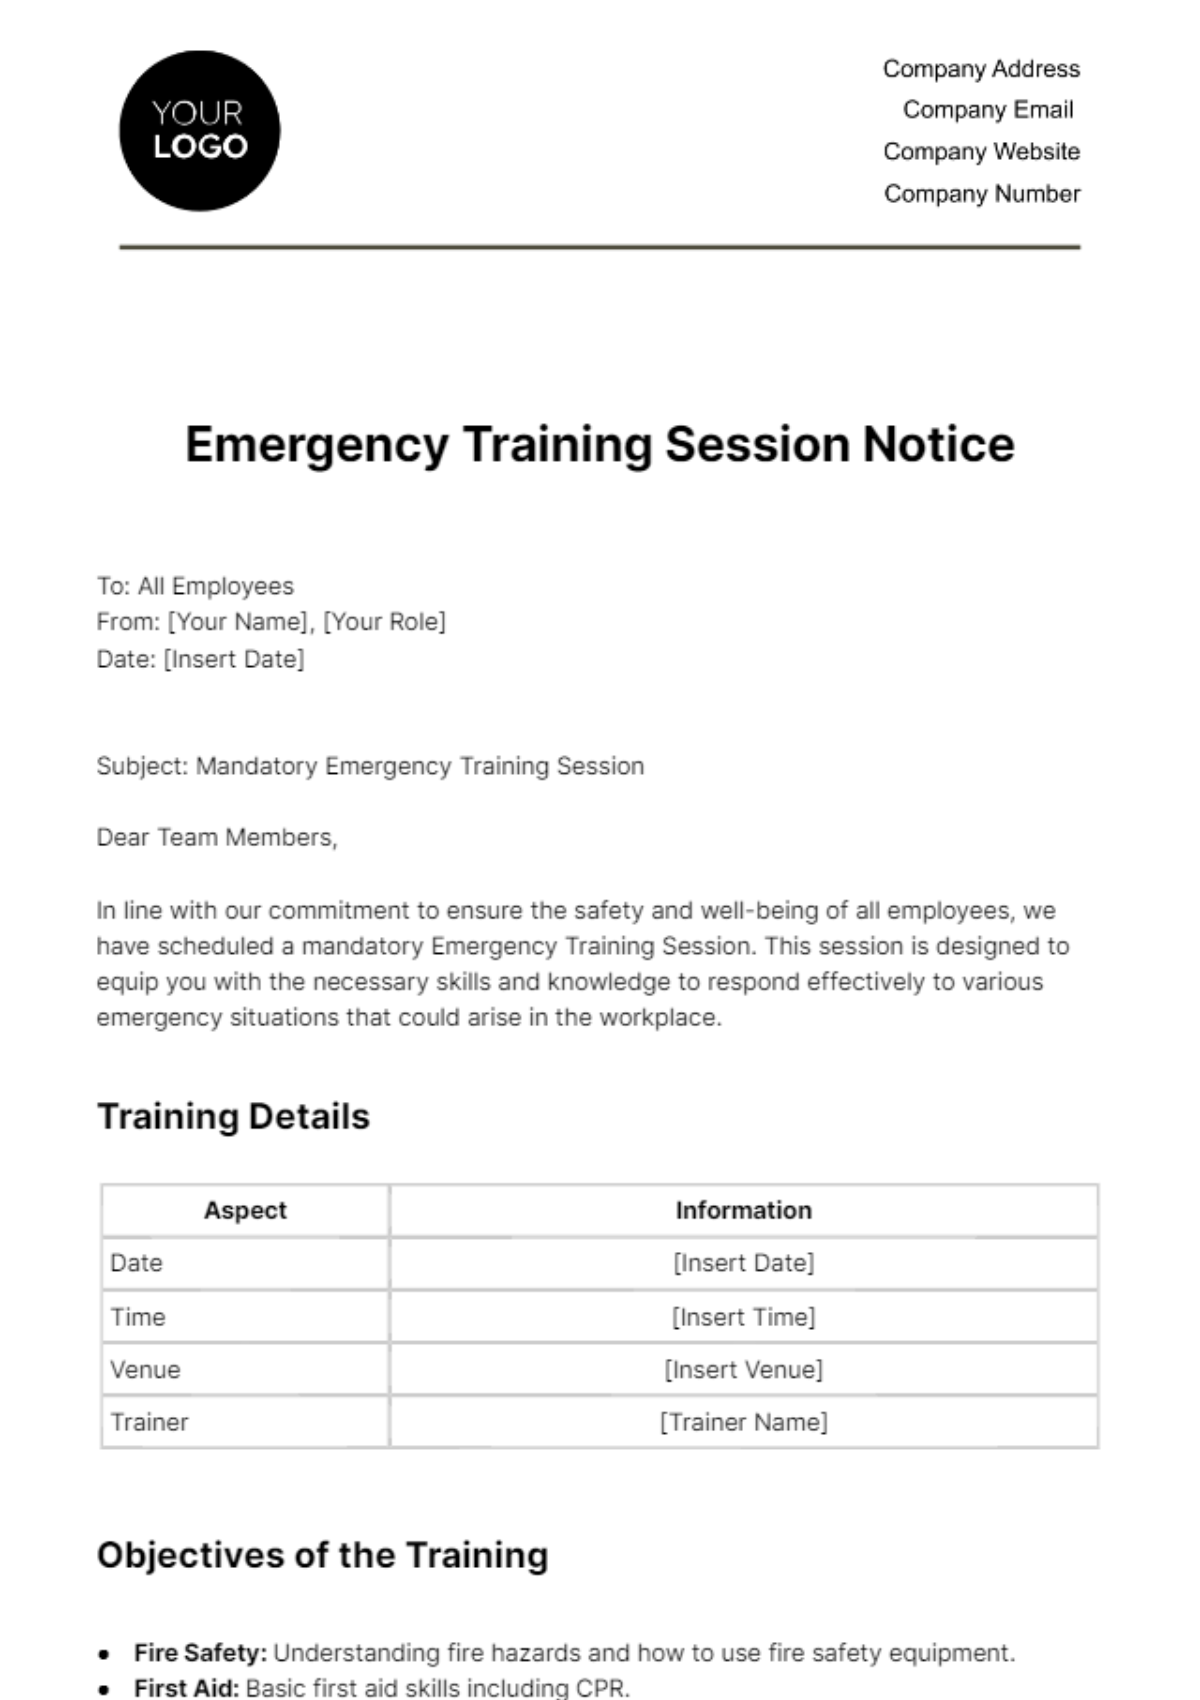 Free Emergency Training Session Notice HR Template